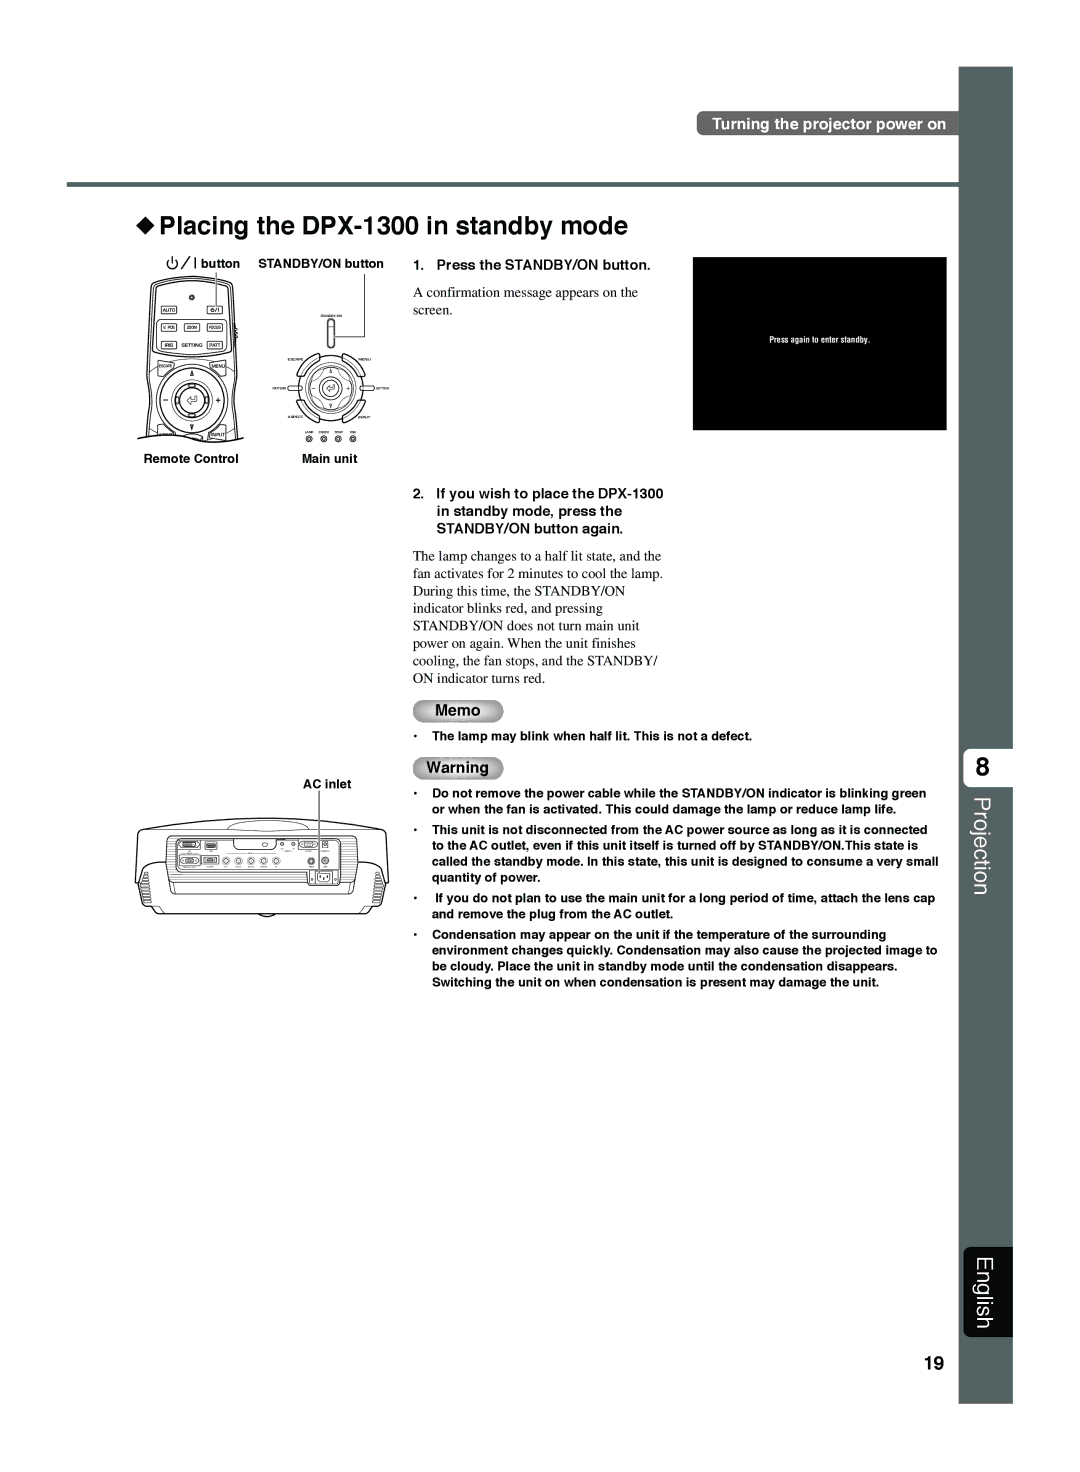 Yamaha DPX-1300 G manual Placing the DPX-1300 in standby mode, Press the STANDBY/ON button 